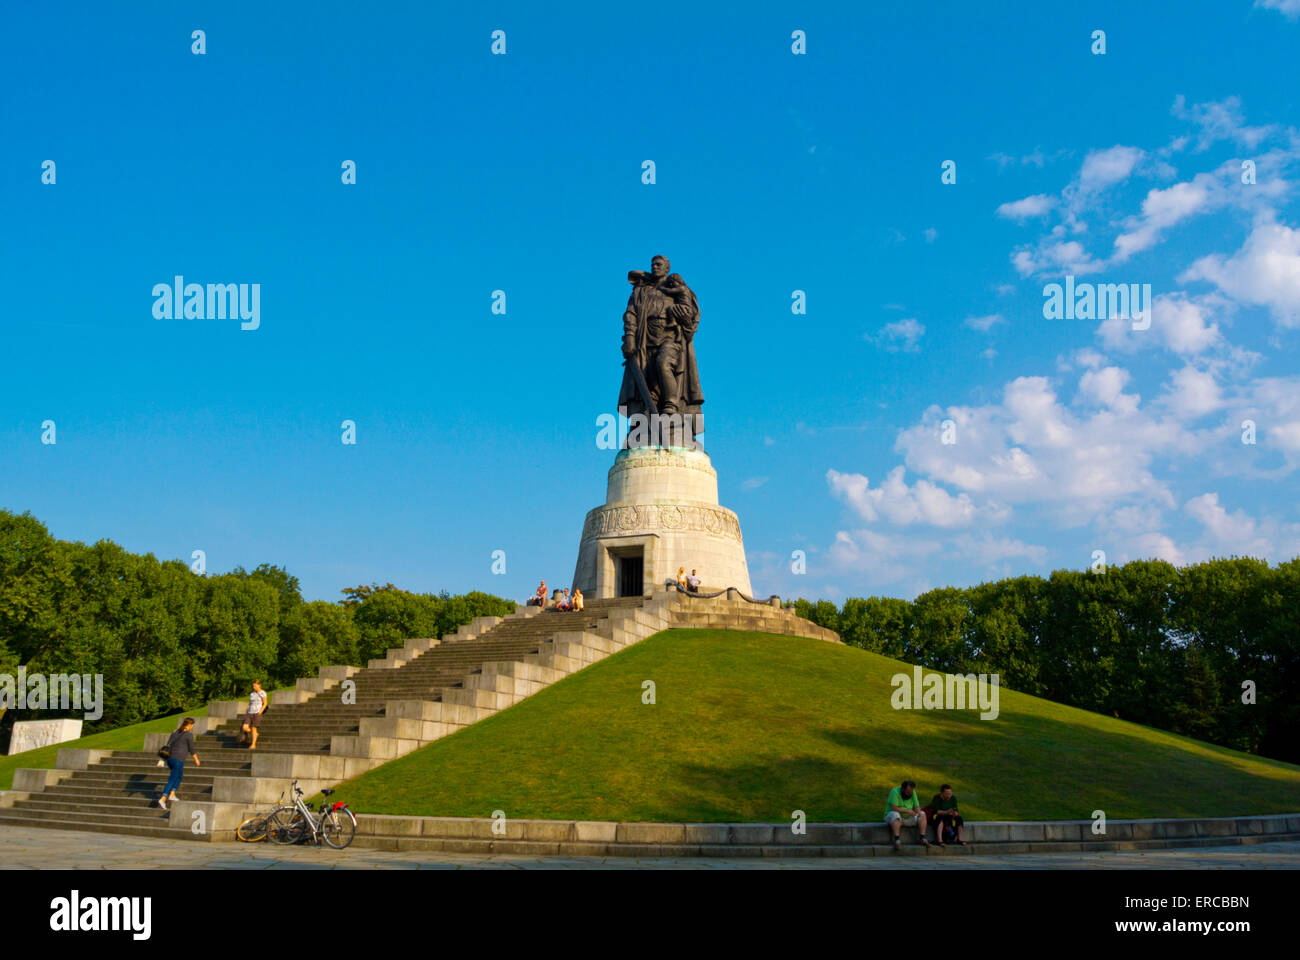 Soldier statue by Yevgeny Vuchetich, part of Soviet War Memorial, Treptower park, Treptow district, Berlin, Germany Stock Photo